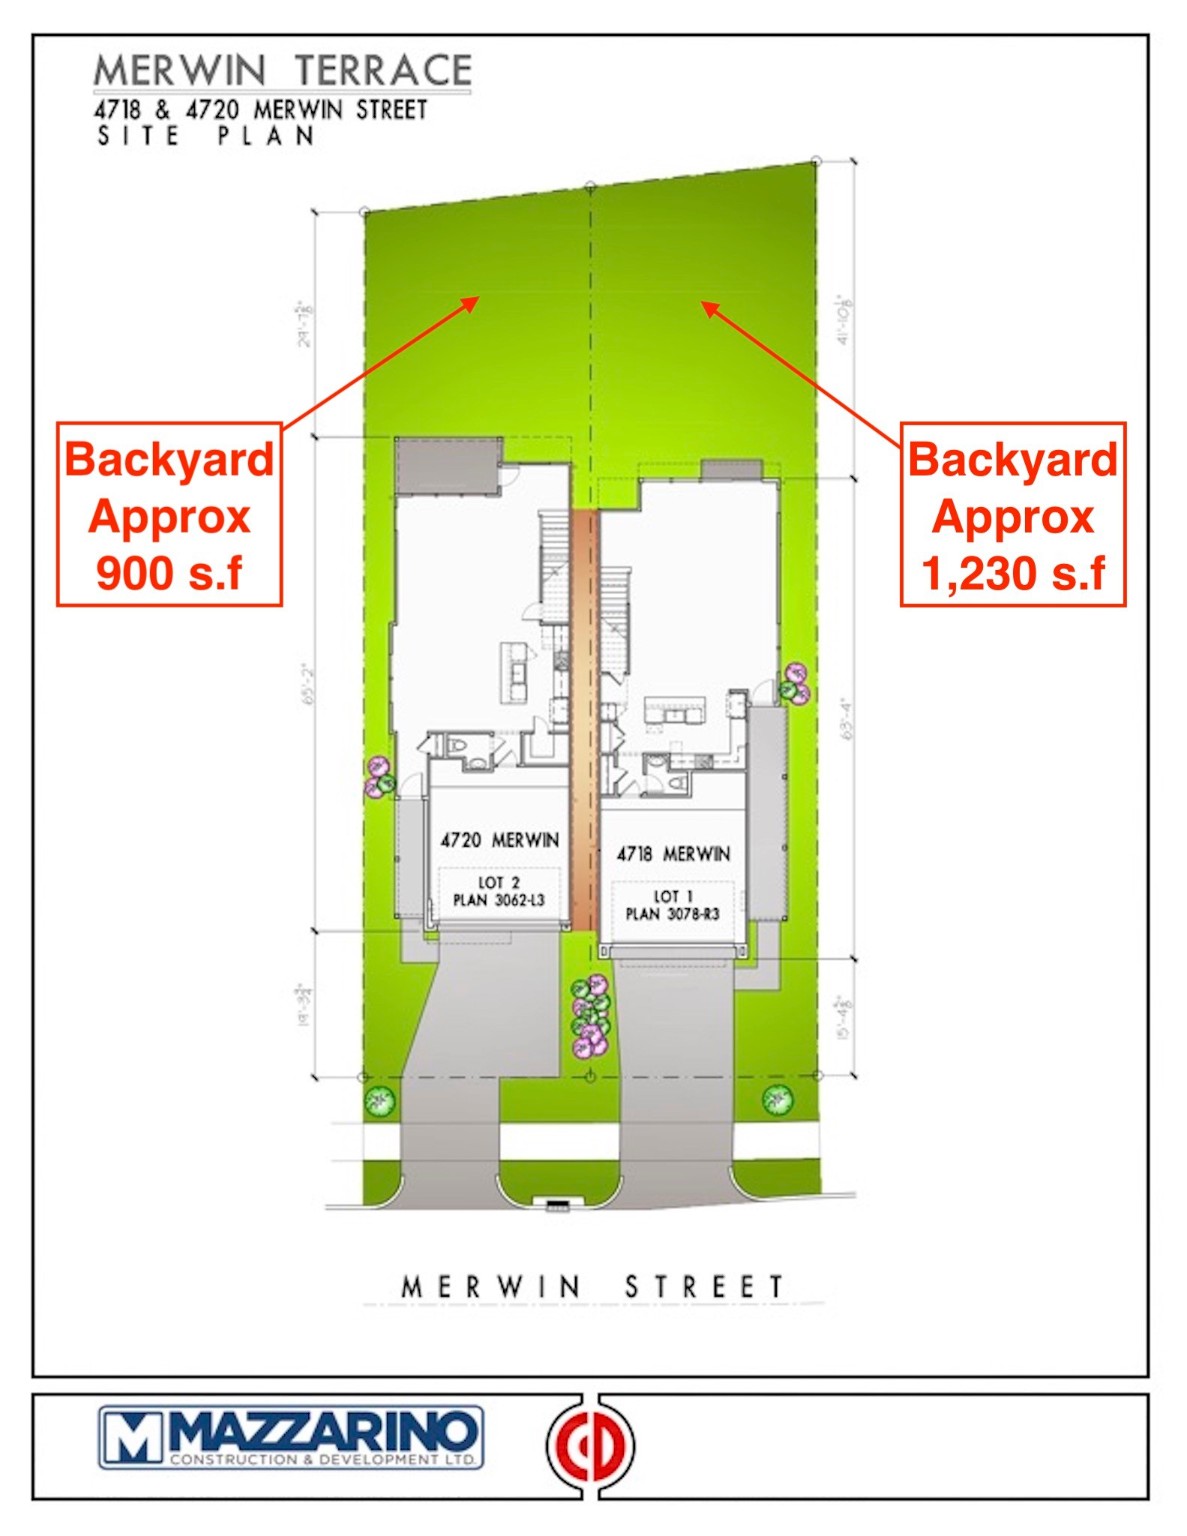 Please be aware that these plans are the property of the architect/builder designer that designed them not DUX Realty, 4720 MERWIN LLC or MAZZTAO Homes and are protected from reproduction and sharing under copyright law. These drawing are for general information only. Measurements, square footages and features are for illustrative marketing purposes. All information should be independently verified. Plans are subject to change without notification.